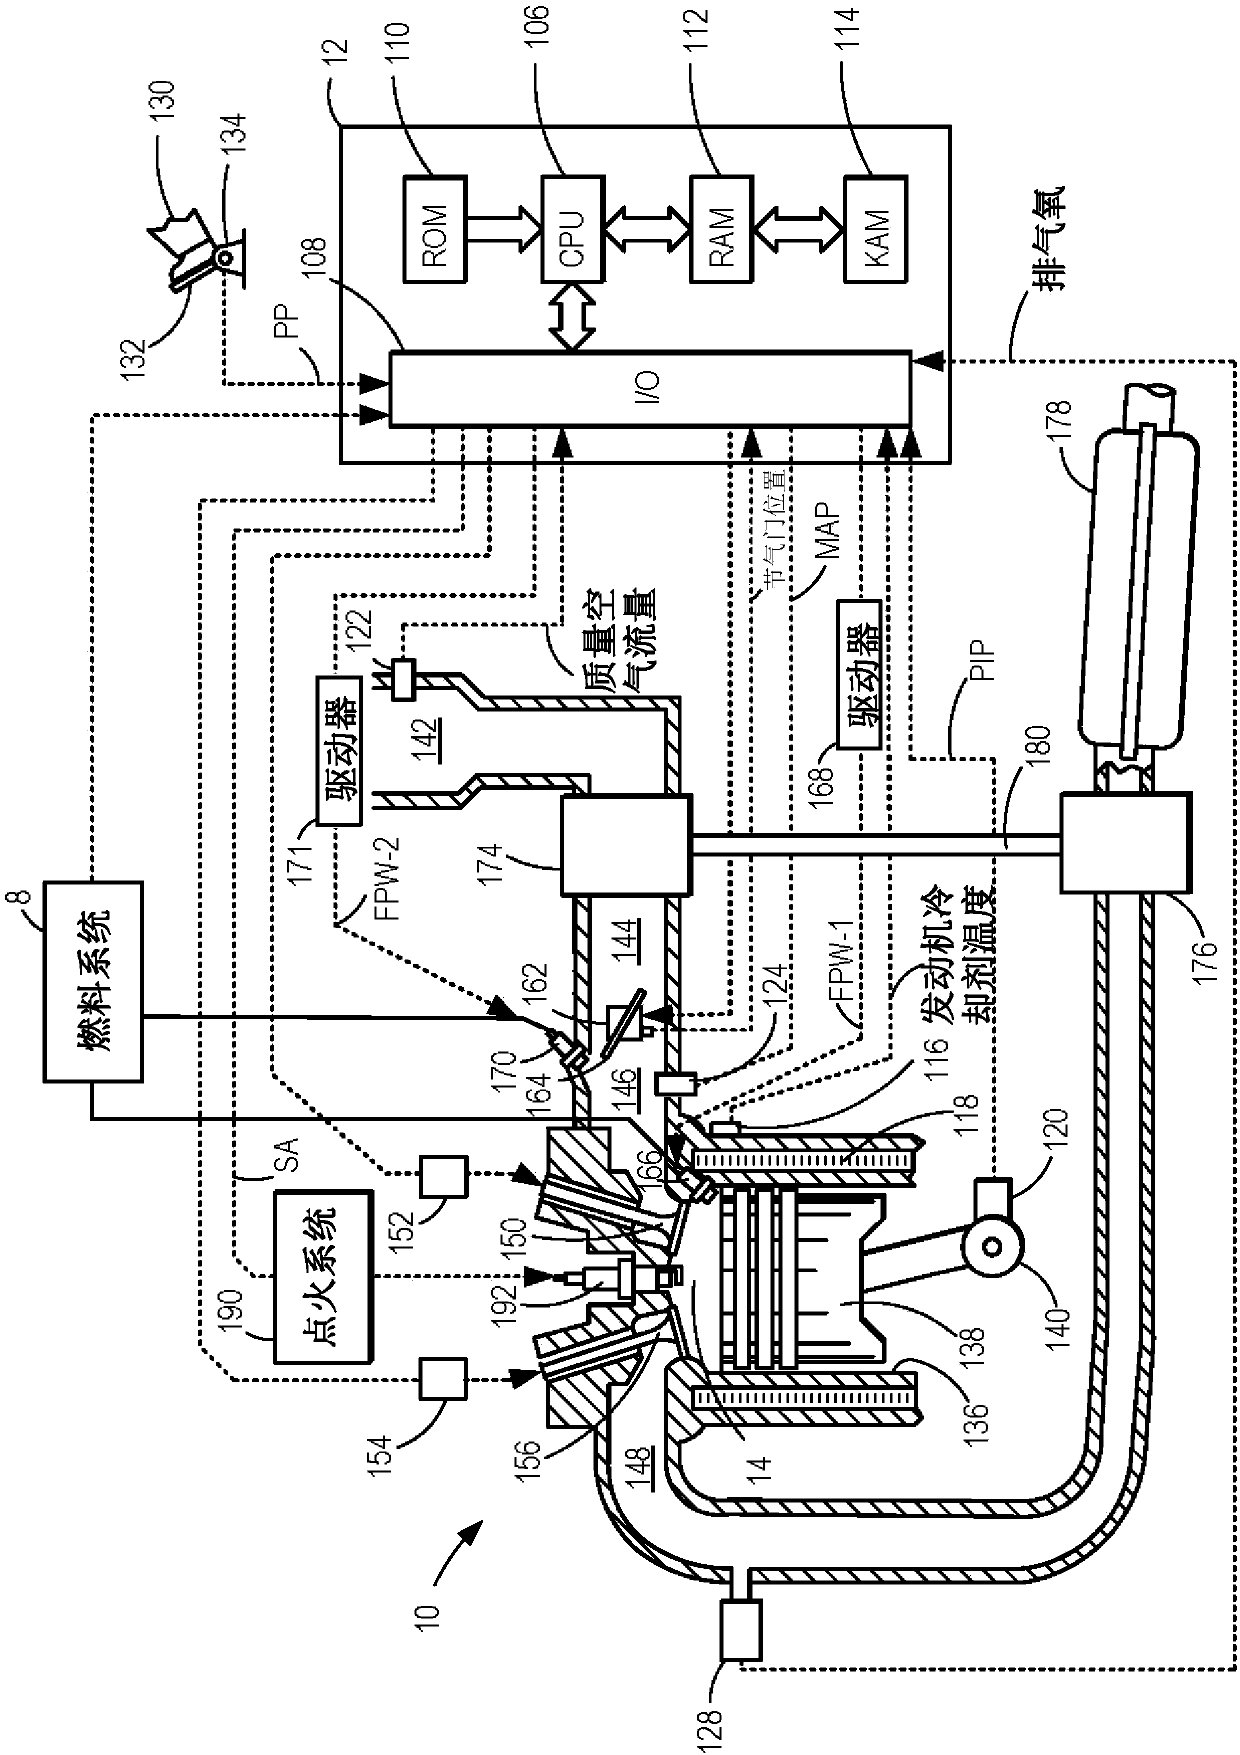 Methods and systems for engine fueling